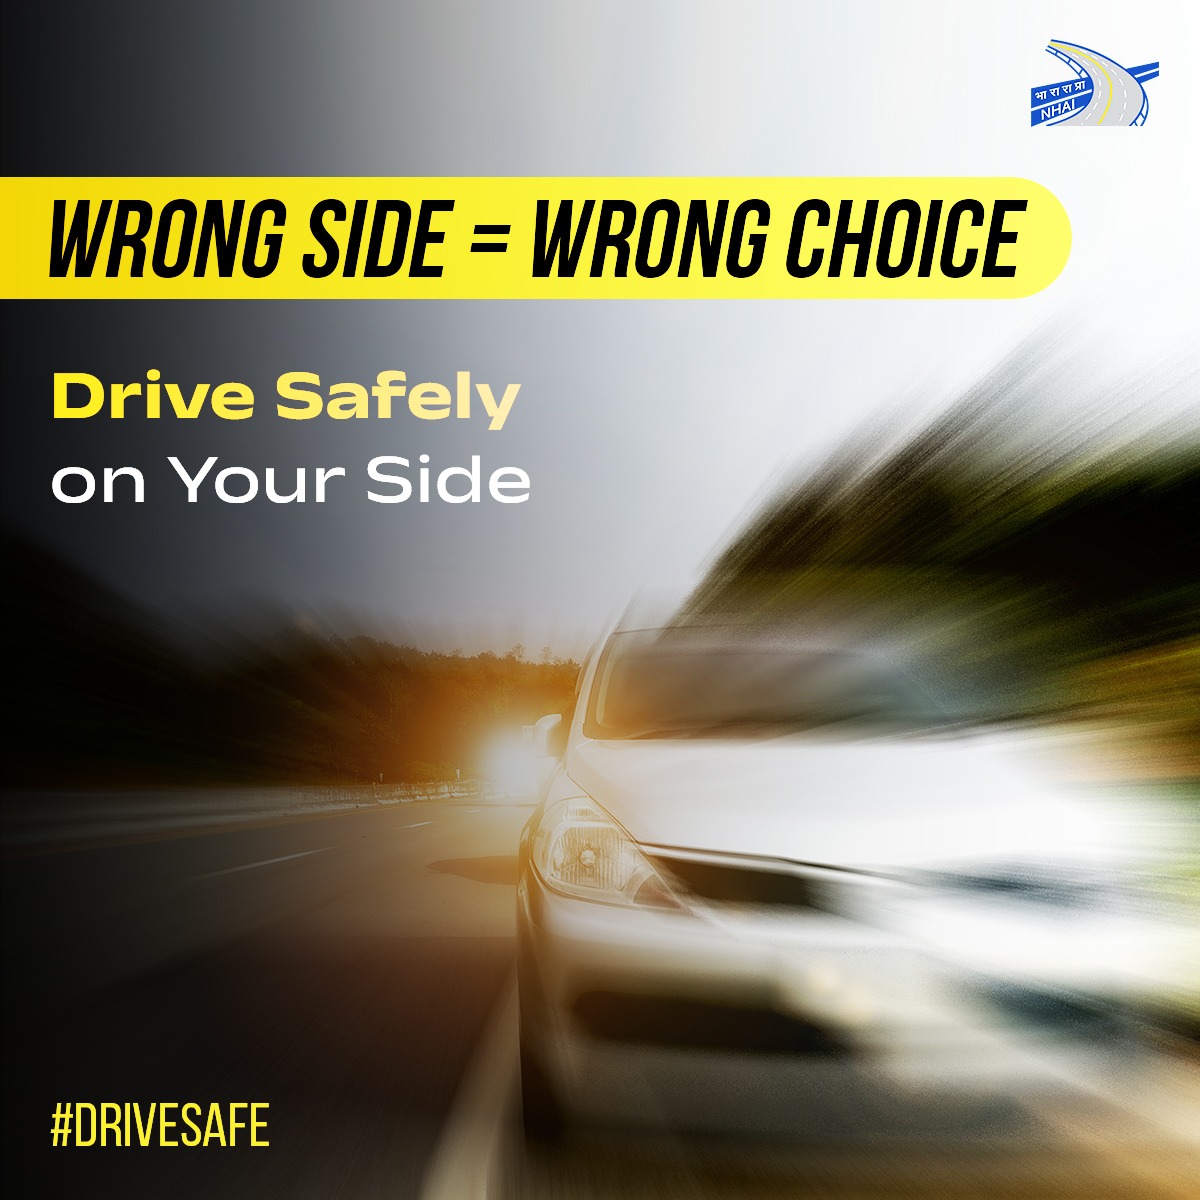 Driving on the wrong side of a road might seem like a shortcut, but it puts you and others at serious risk. Stay alert and never drive on the wrong side of the road. #WrongSideWrongChoice #NHAI #DriveSafe